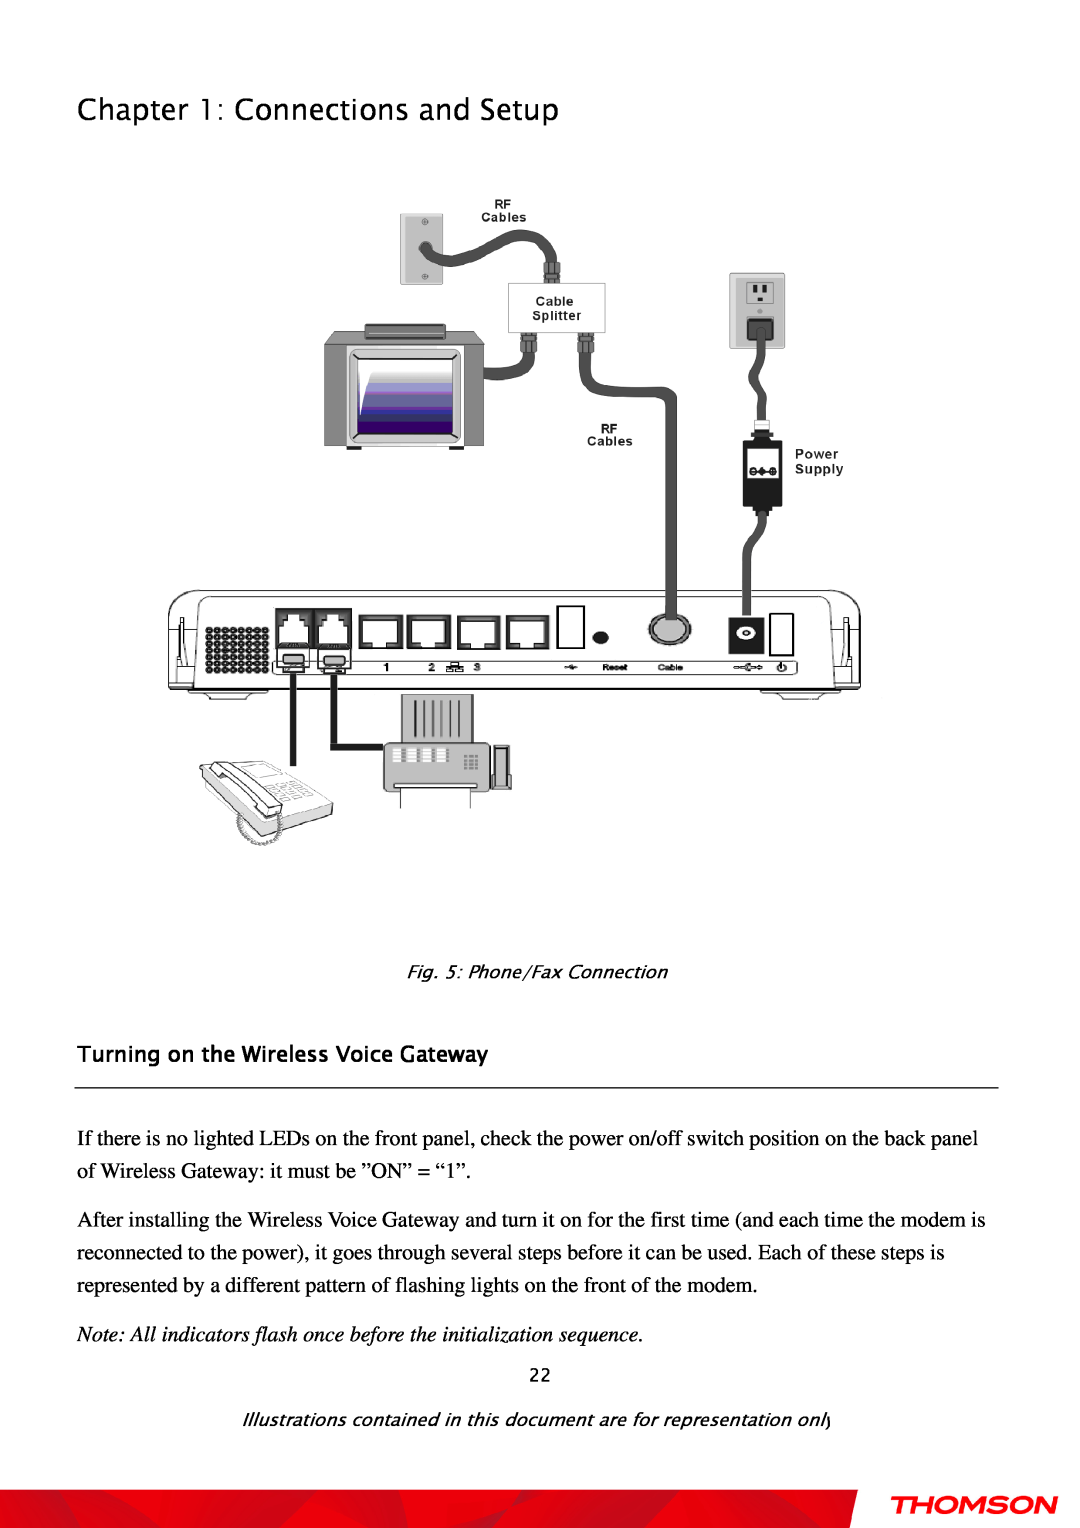 Gateway TWG870 user manual Connections and Setup, Turning on the Wireless Voice Gateway, Phone/Fax Connection 